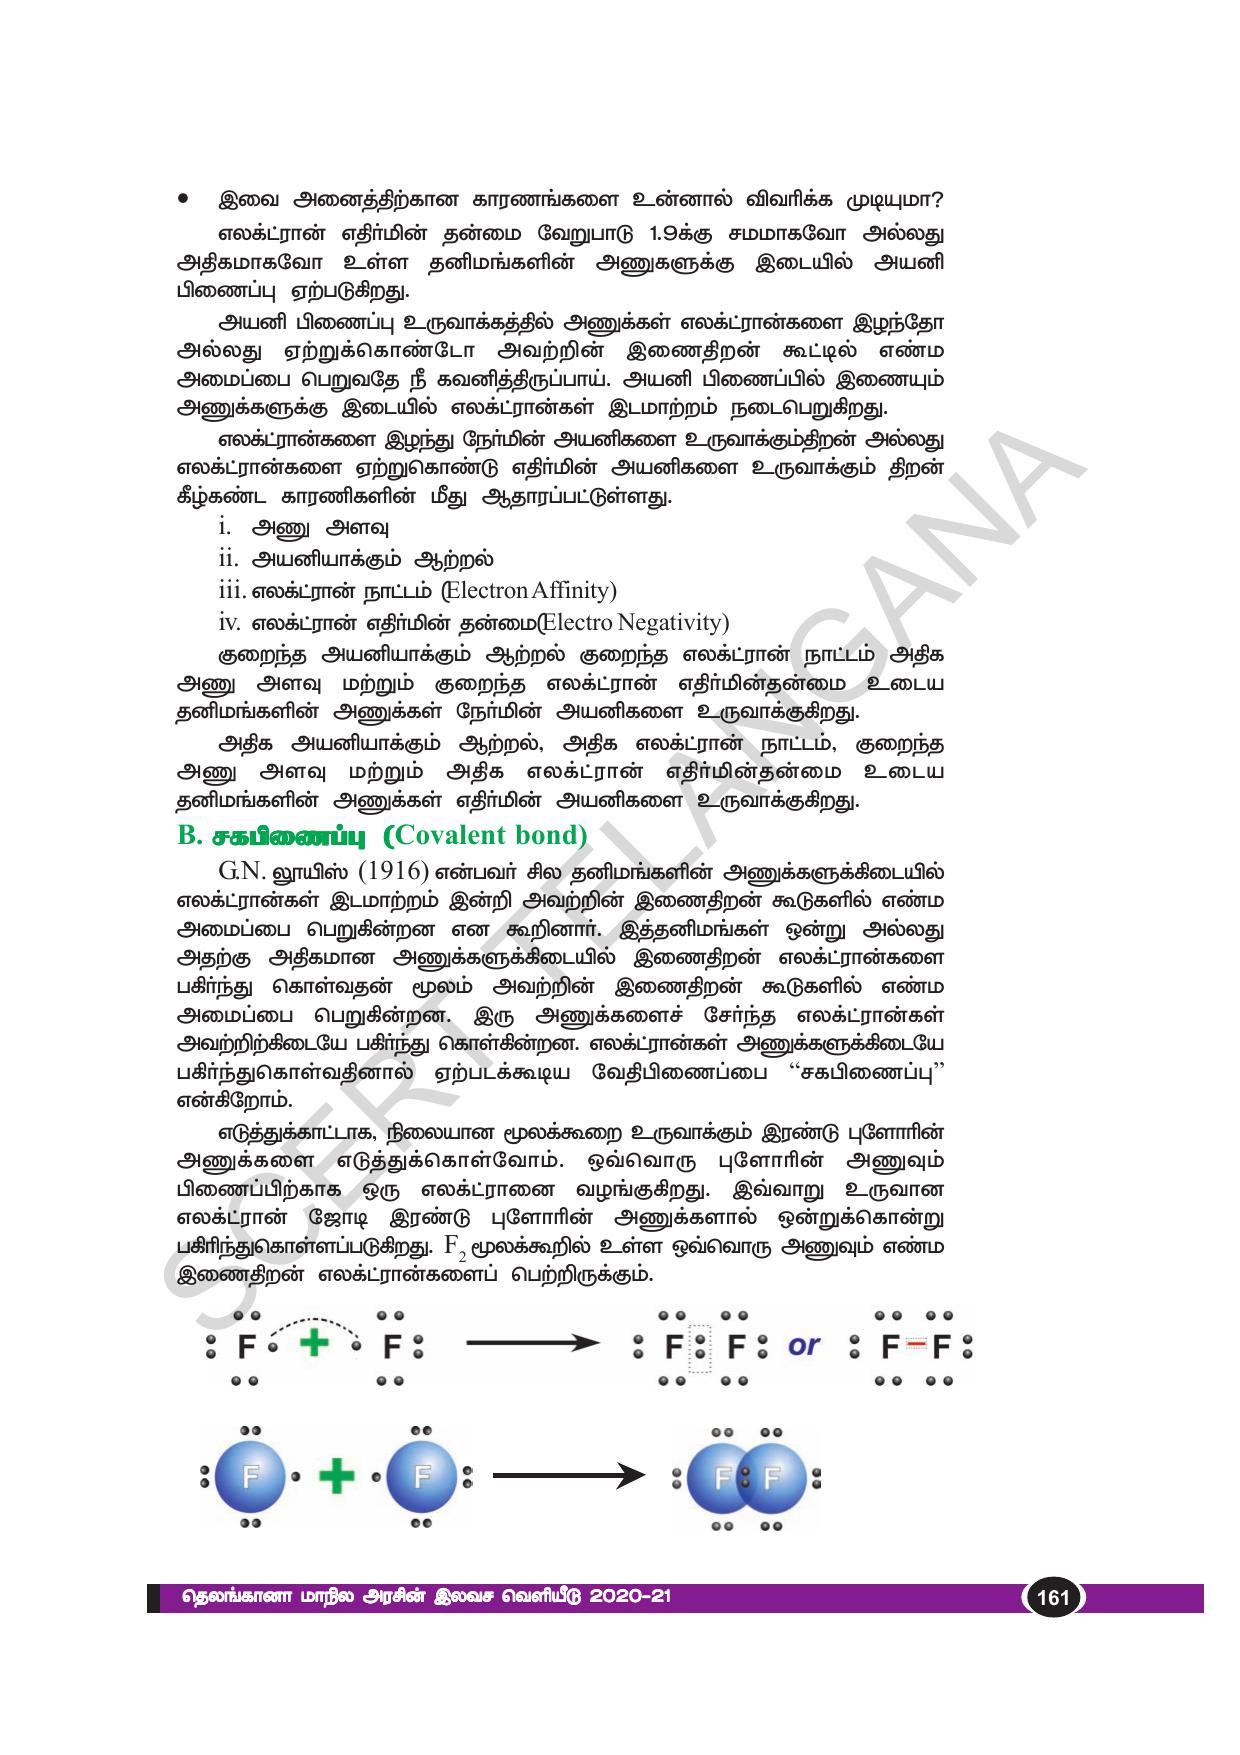 TS SCERT Class 10 Physical Science(Tamil Medium) Text Book - Page 173